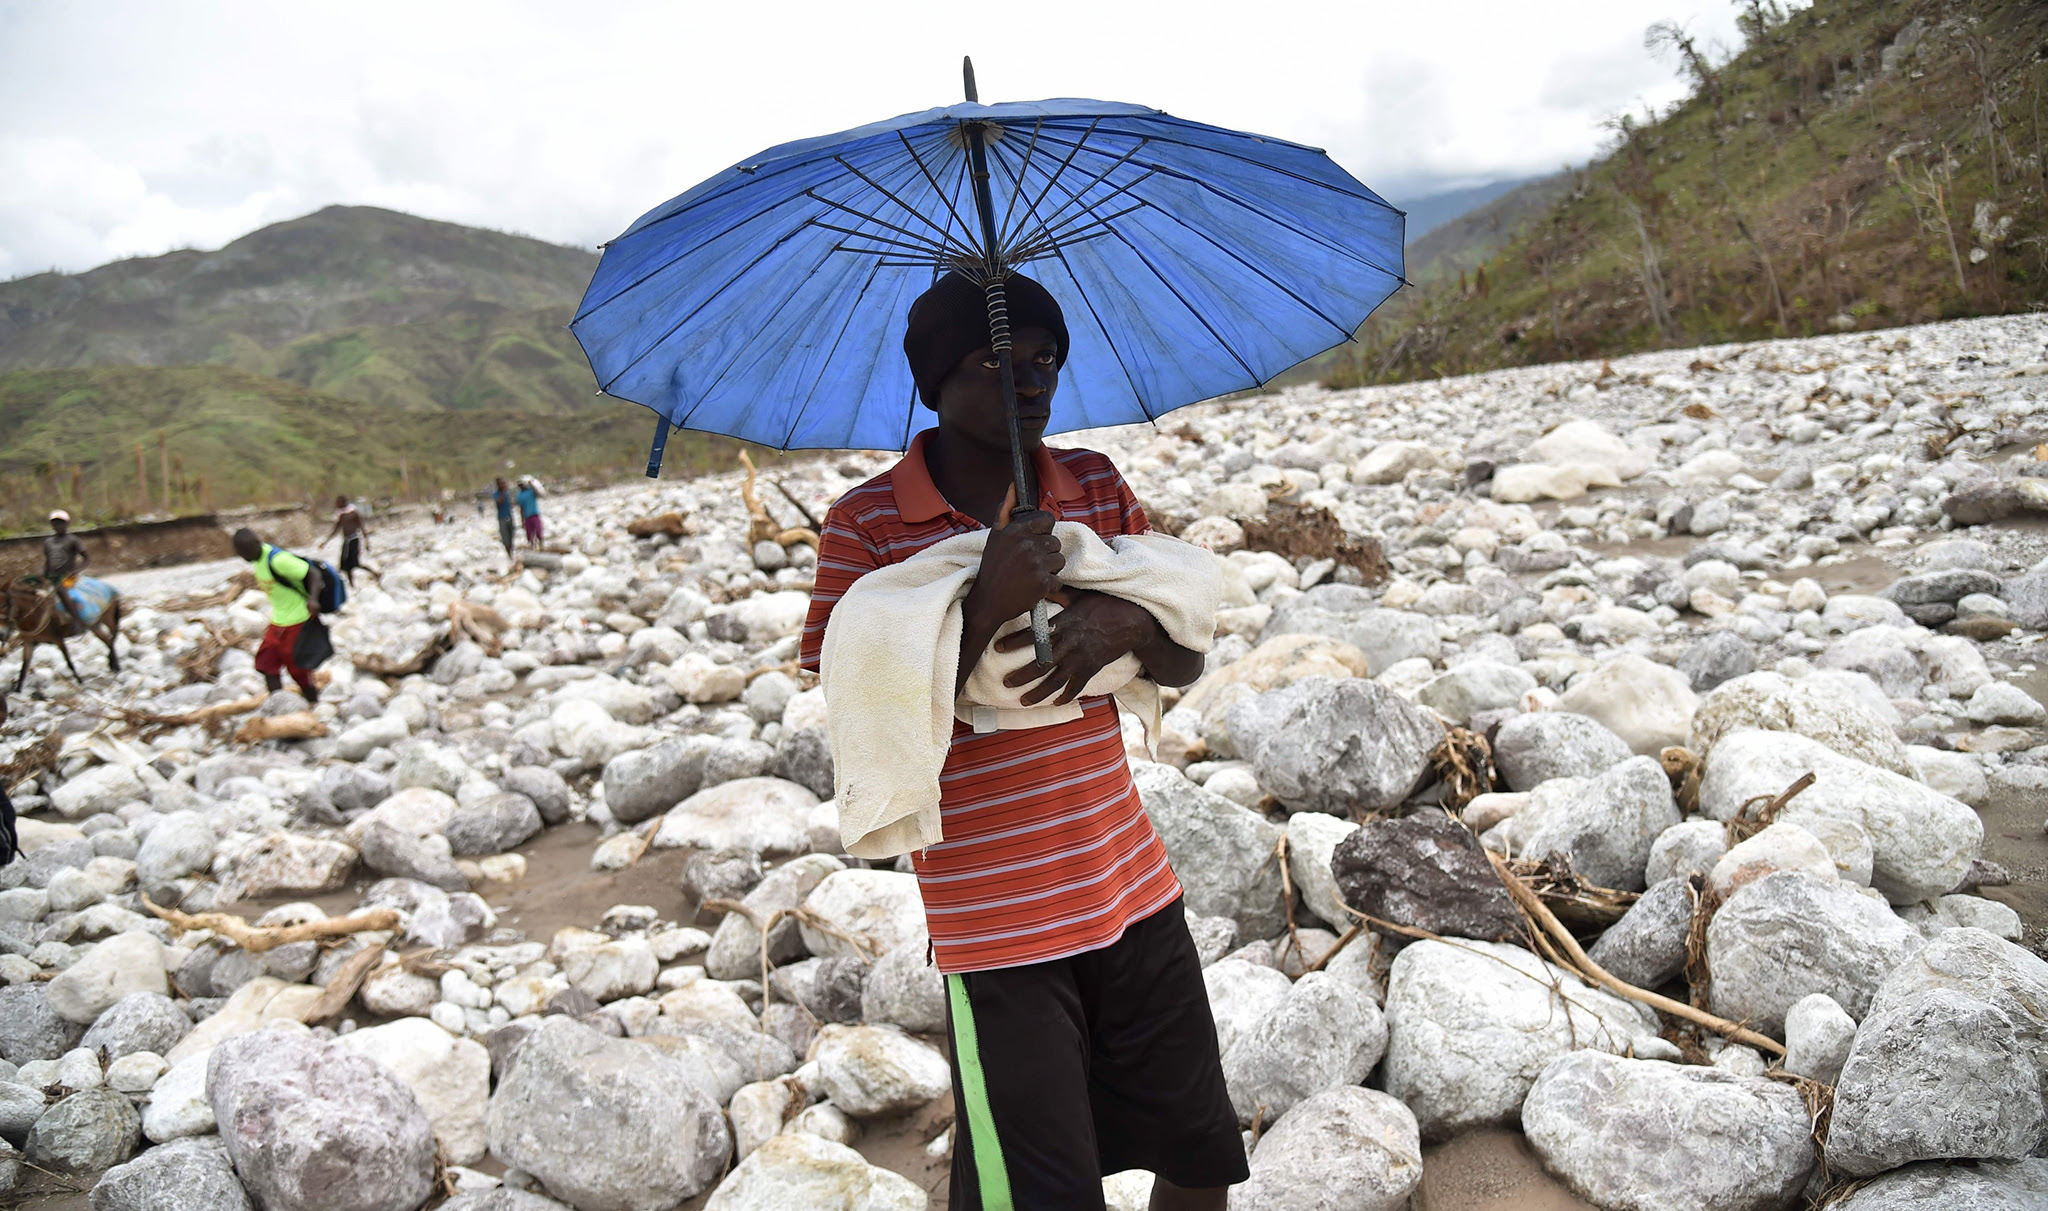 TOPSHOT - A man carries his baby on a trail in the middle of the river that passes near the village of Randelle, in the commune of Chardonniere, in the south west of Haiti, on October 19, 2016. The road leading to Randelle and other villages on the mountains was cut off after the passage of Hurricane Matthew. / AFP PHOTO / HECTOR RETAMALHECTOR RETAMAL/AFP/Getty Images